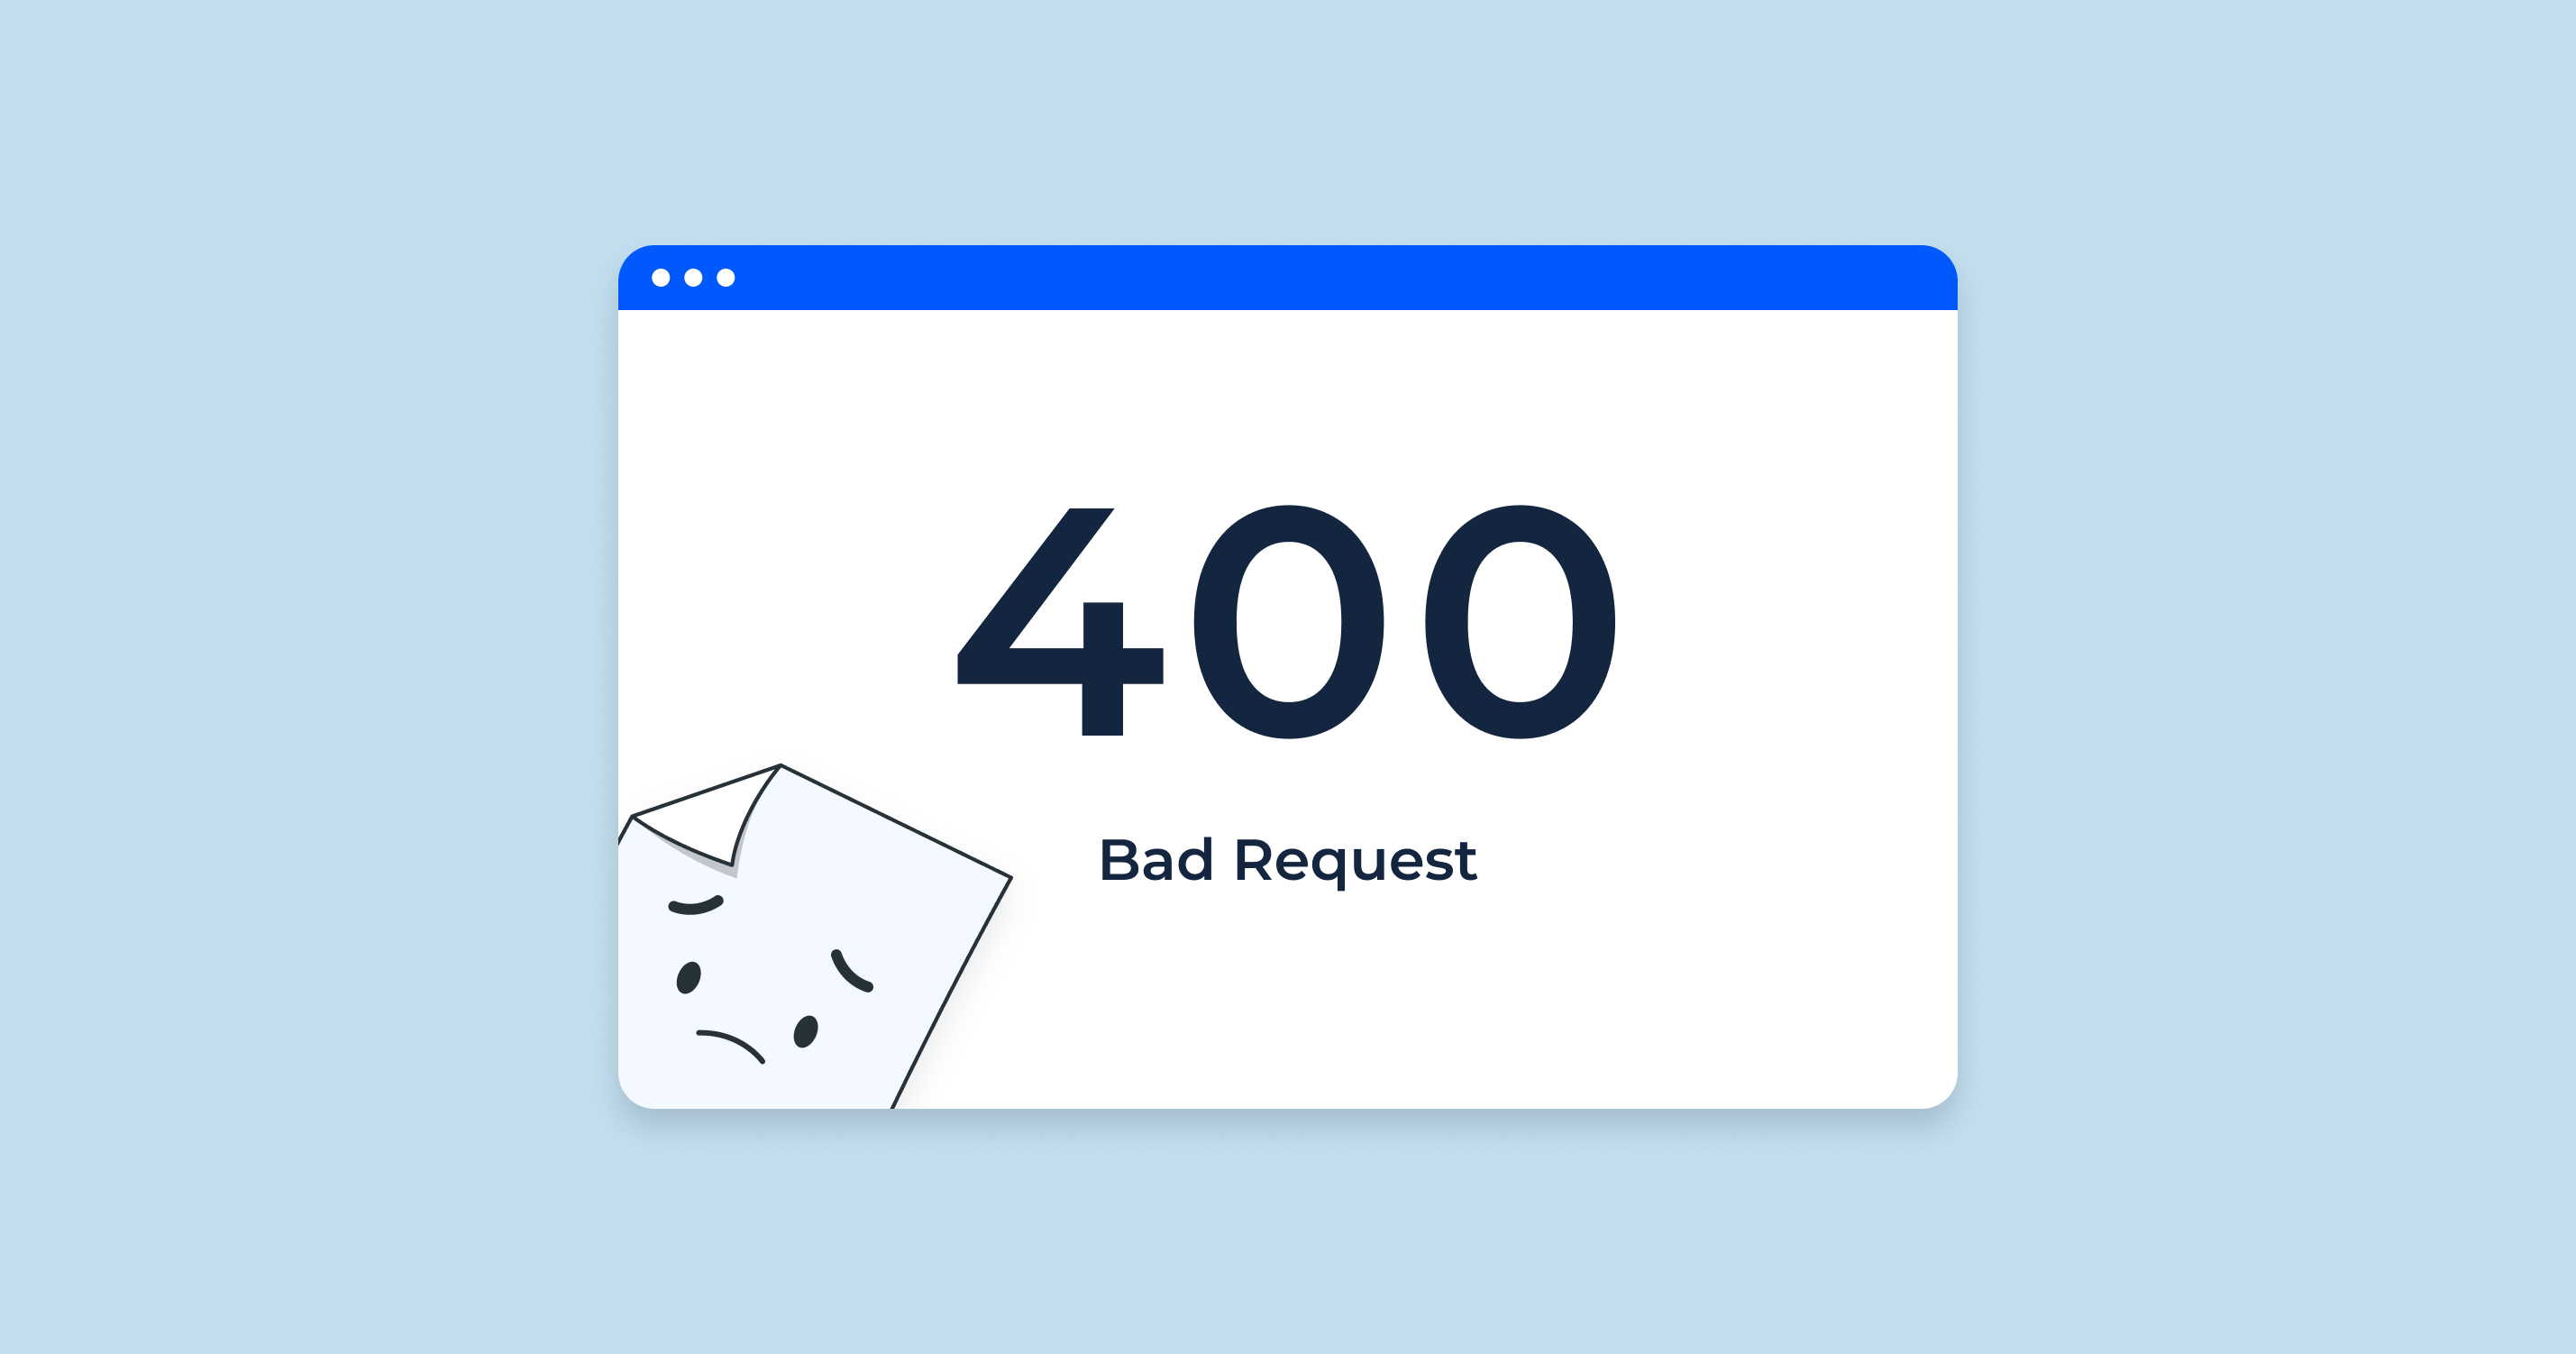 400 Bad Request Error: Guide to Understanding and Resolving